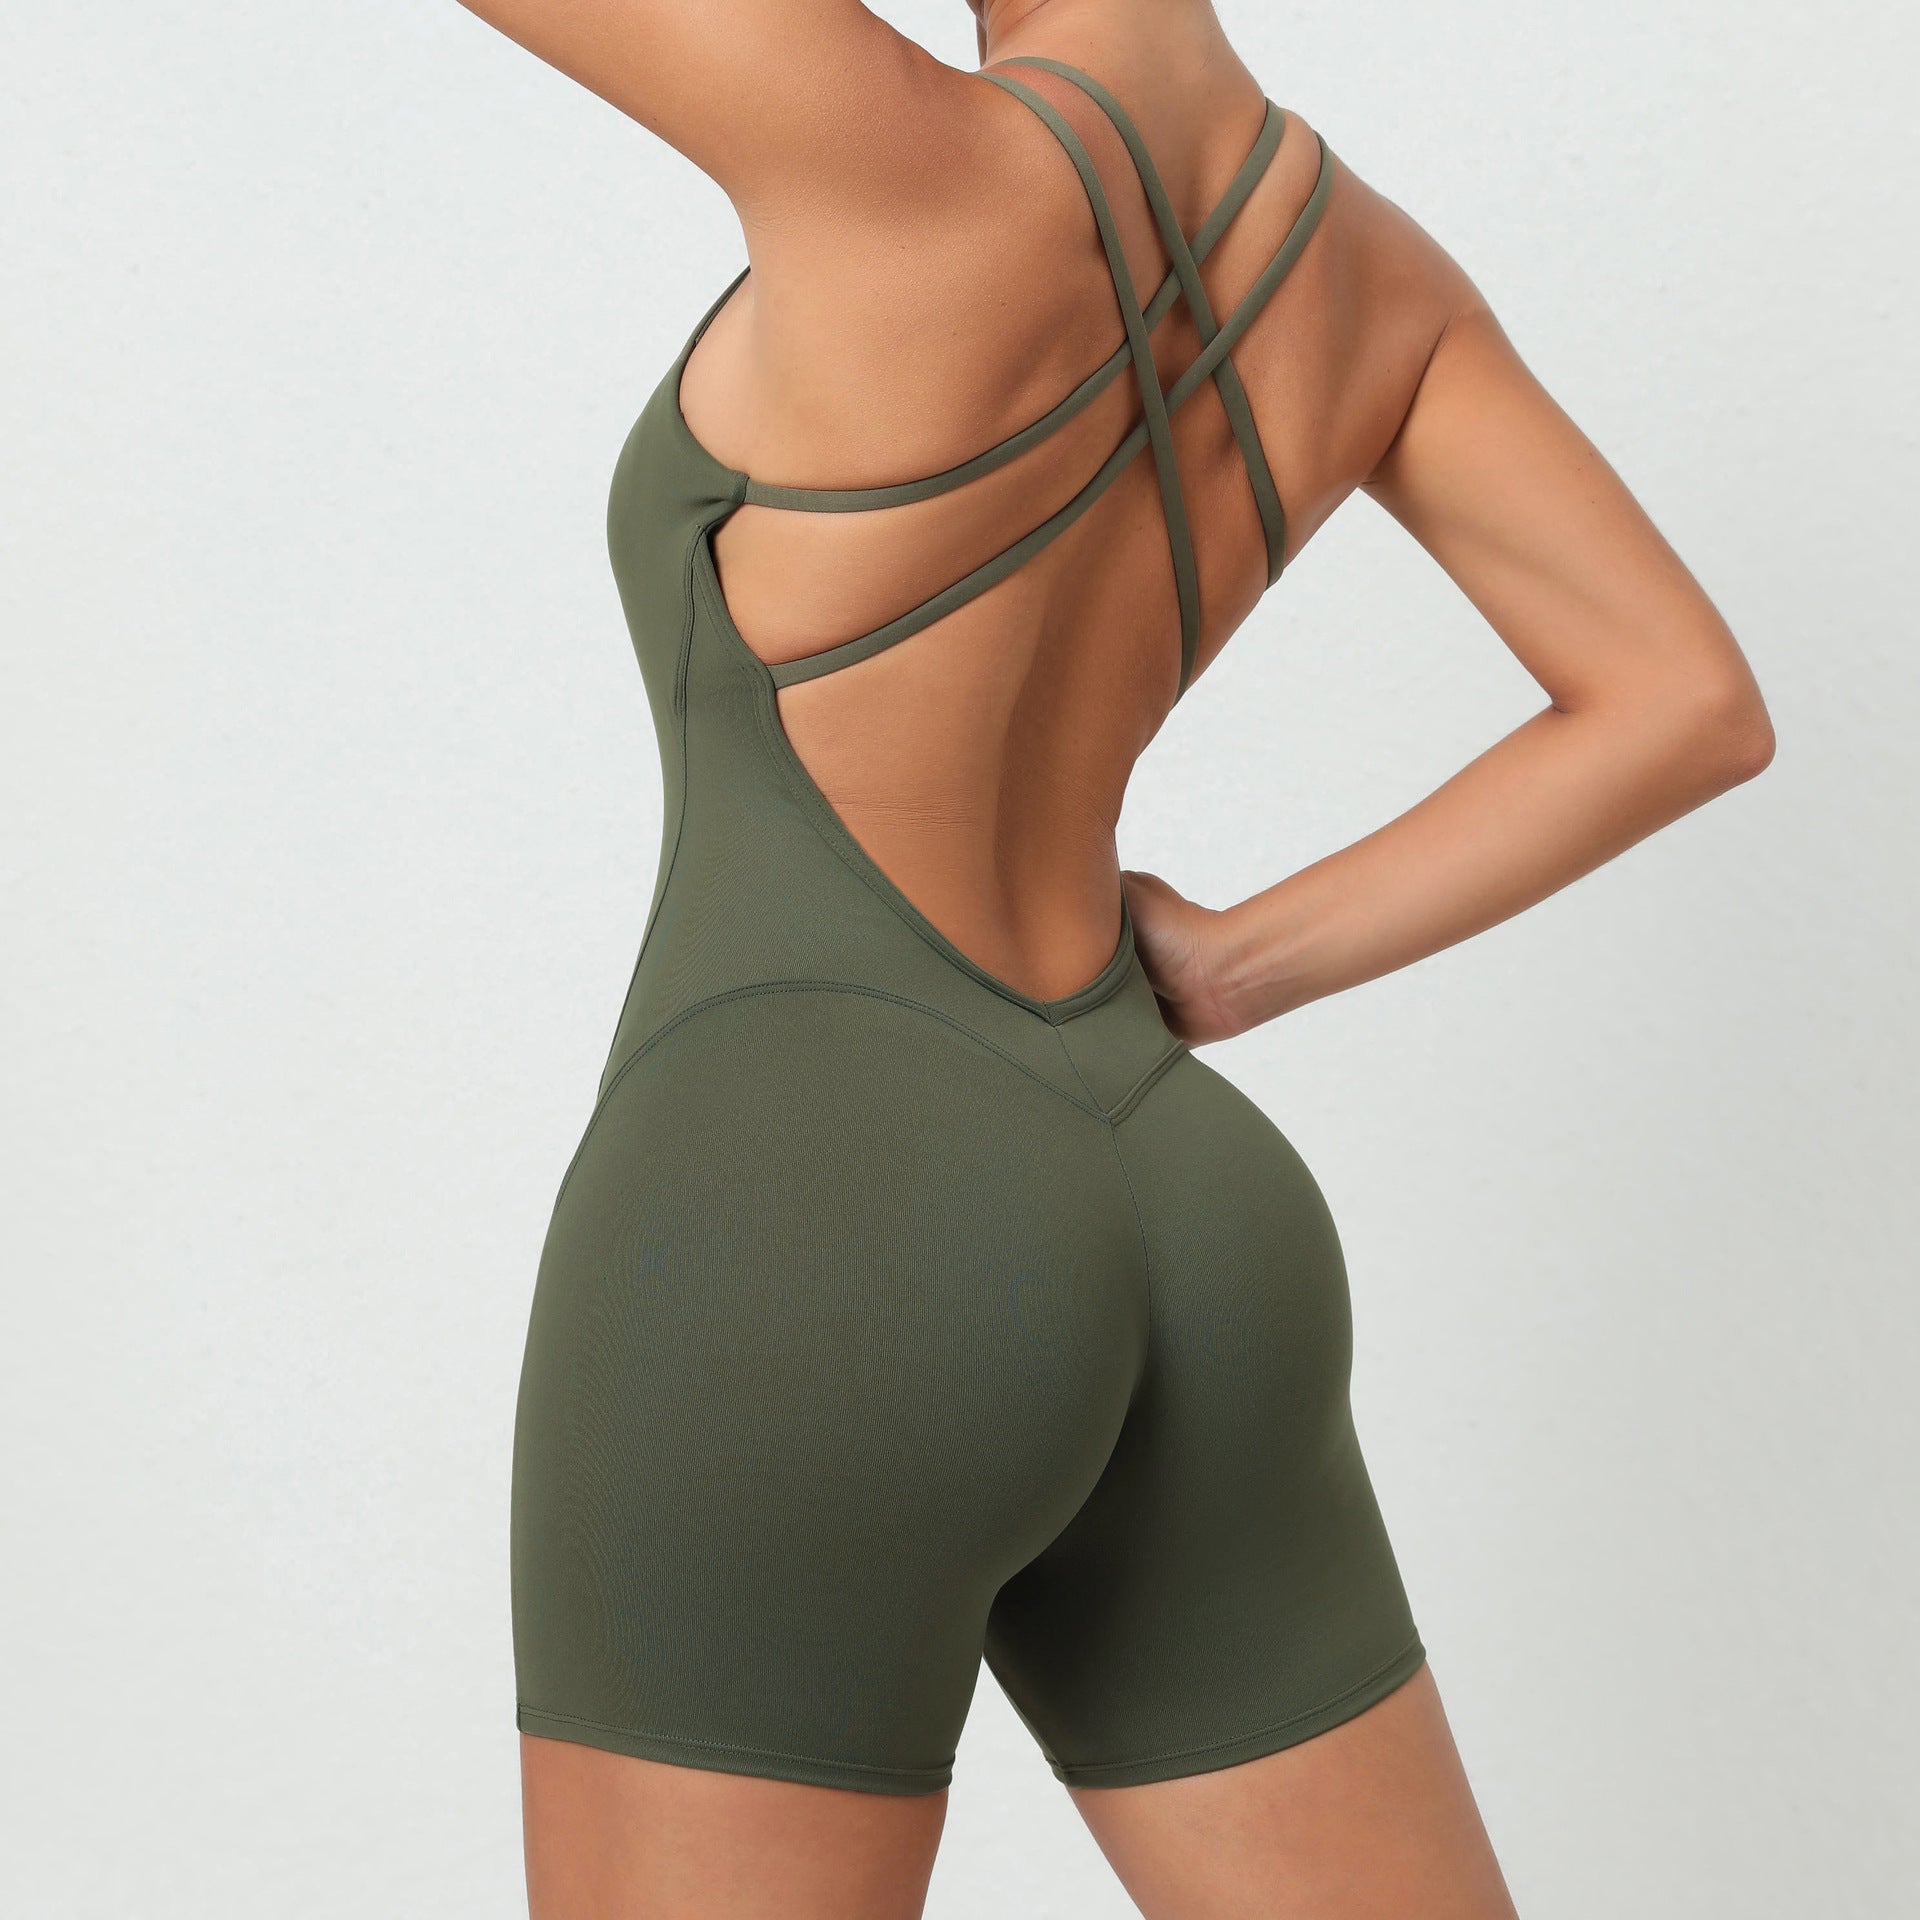 Katrina New Style Peach Hip Tight Sports Jumpsuit Hip Fitness Body-suits